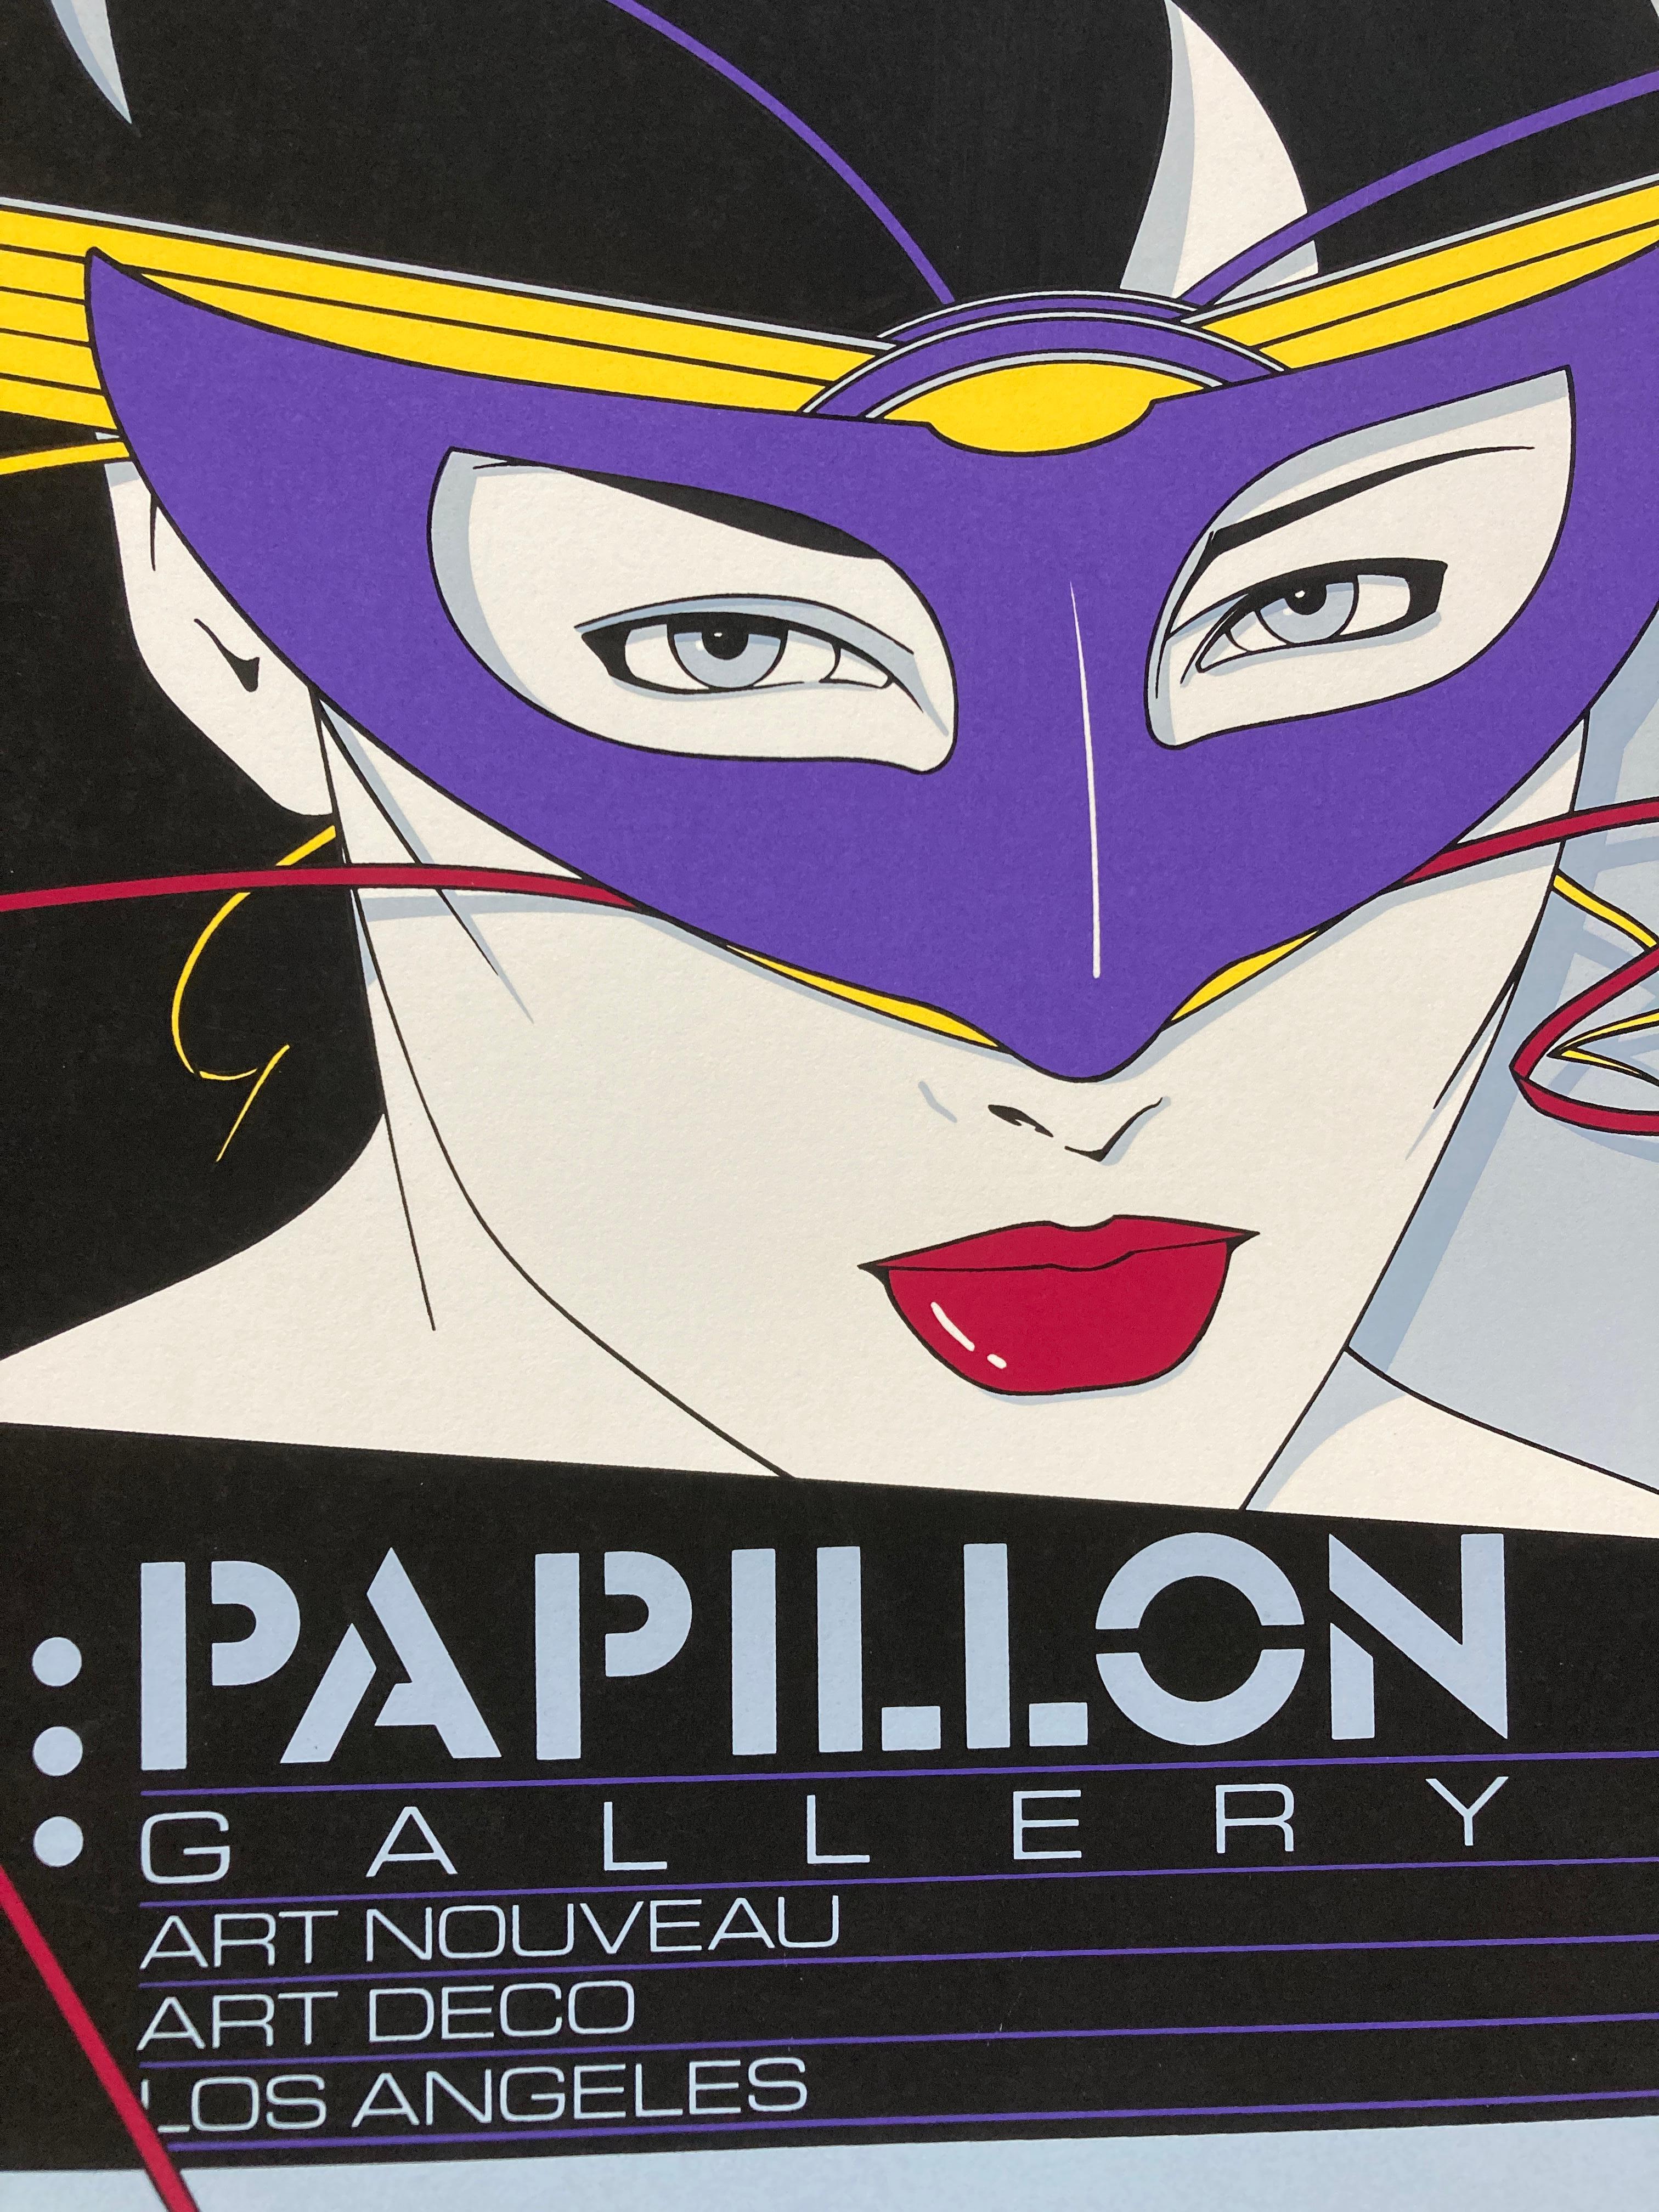 Patrick Nagel 'Papillon Gallery' Serigraph, 1981 For Sale 2